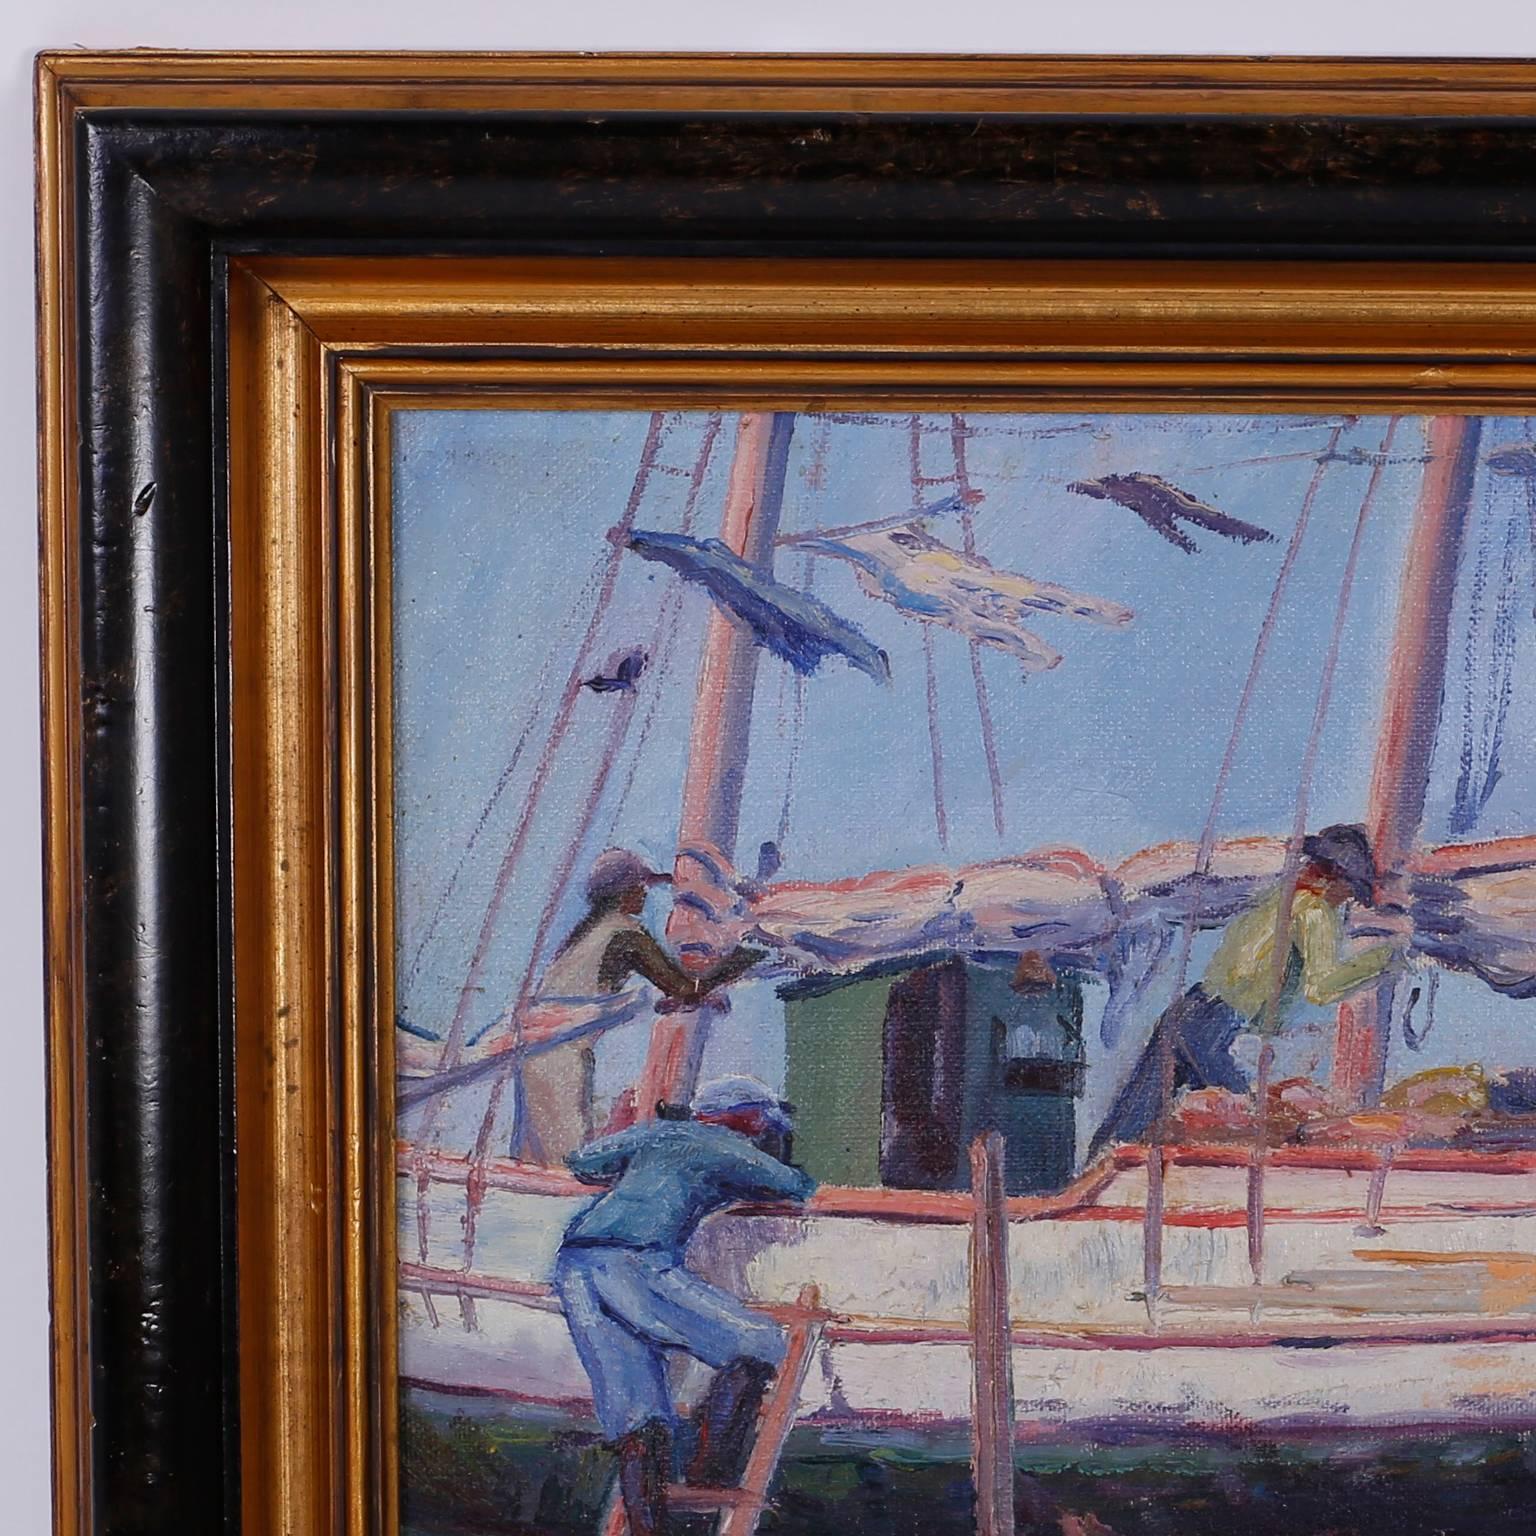 In the tradition of 1930s impressionist, here is a painting by H. A. Burnham of a harbor scene, displaying confident brushstrokes and a striking tropical palette. This oil painting captures the simple spirit of the day. Signed in the lower right and